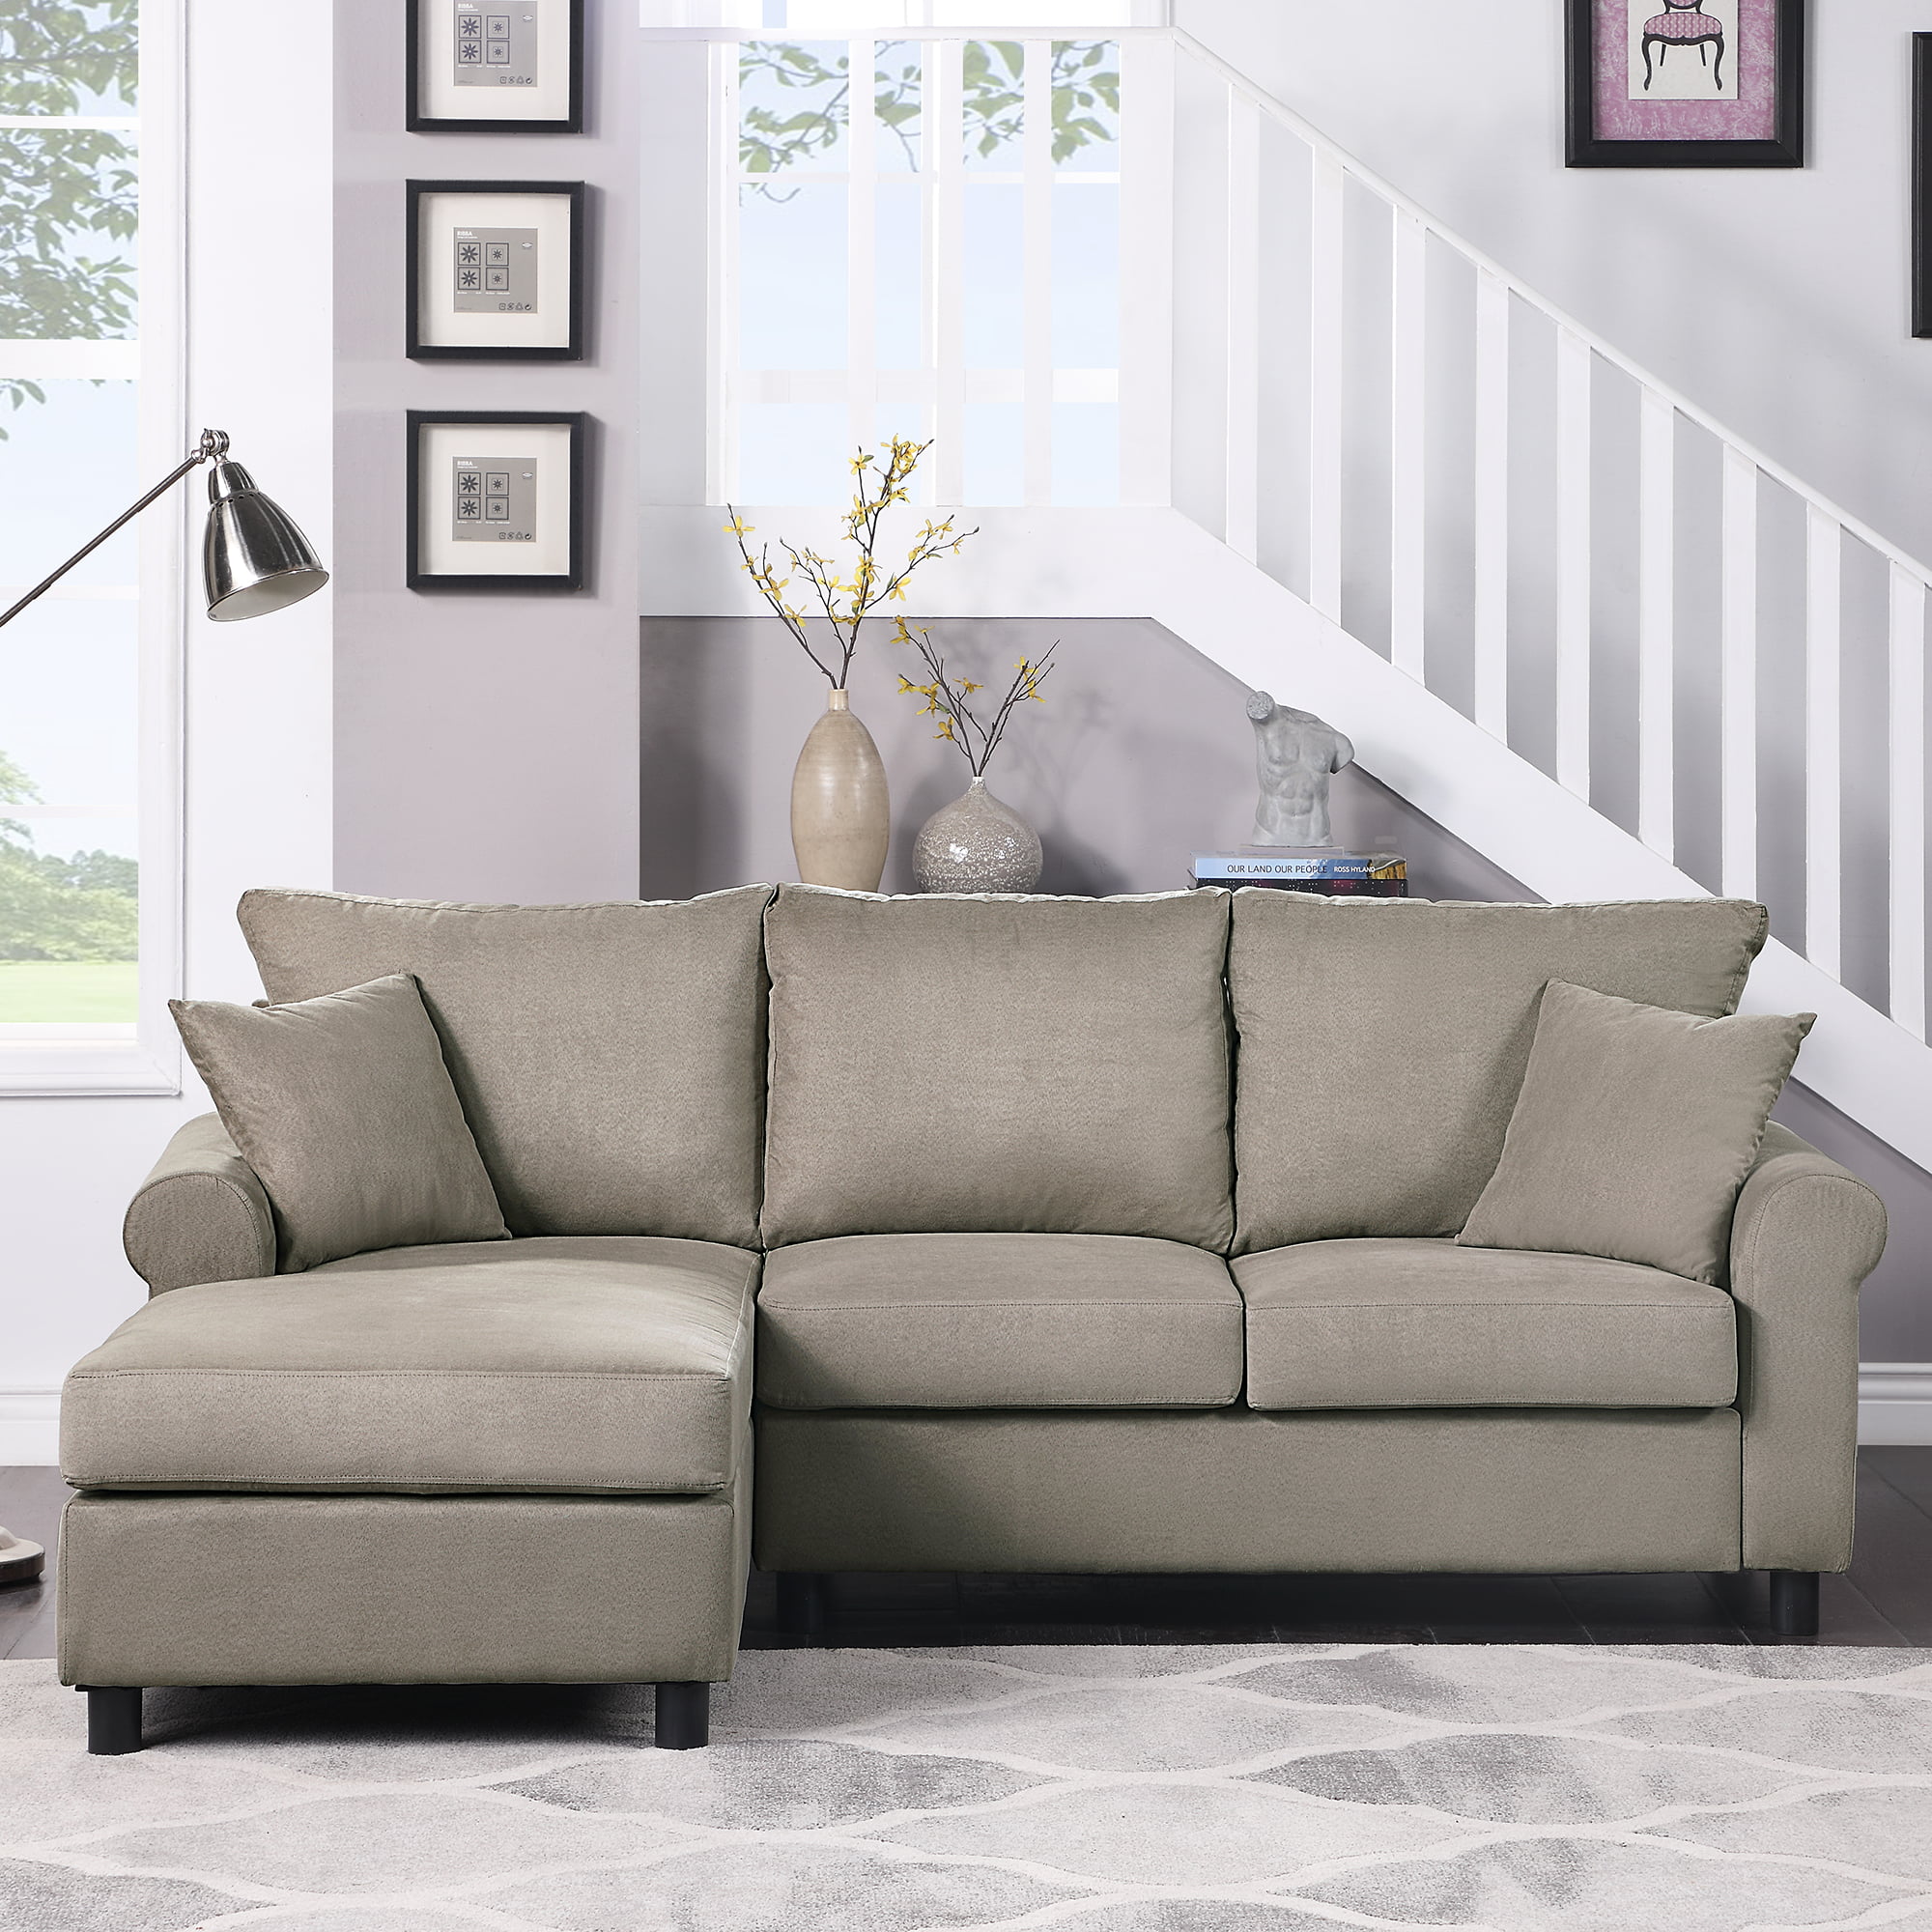 segmart mid century 2 piece sectional sofa sets on sale 35 x 85 x 61 upholstered polyester fabric sectional sofas with chaise lounge loveseat